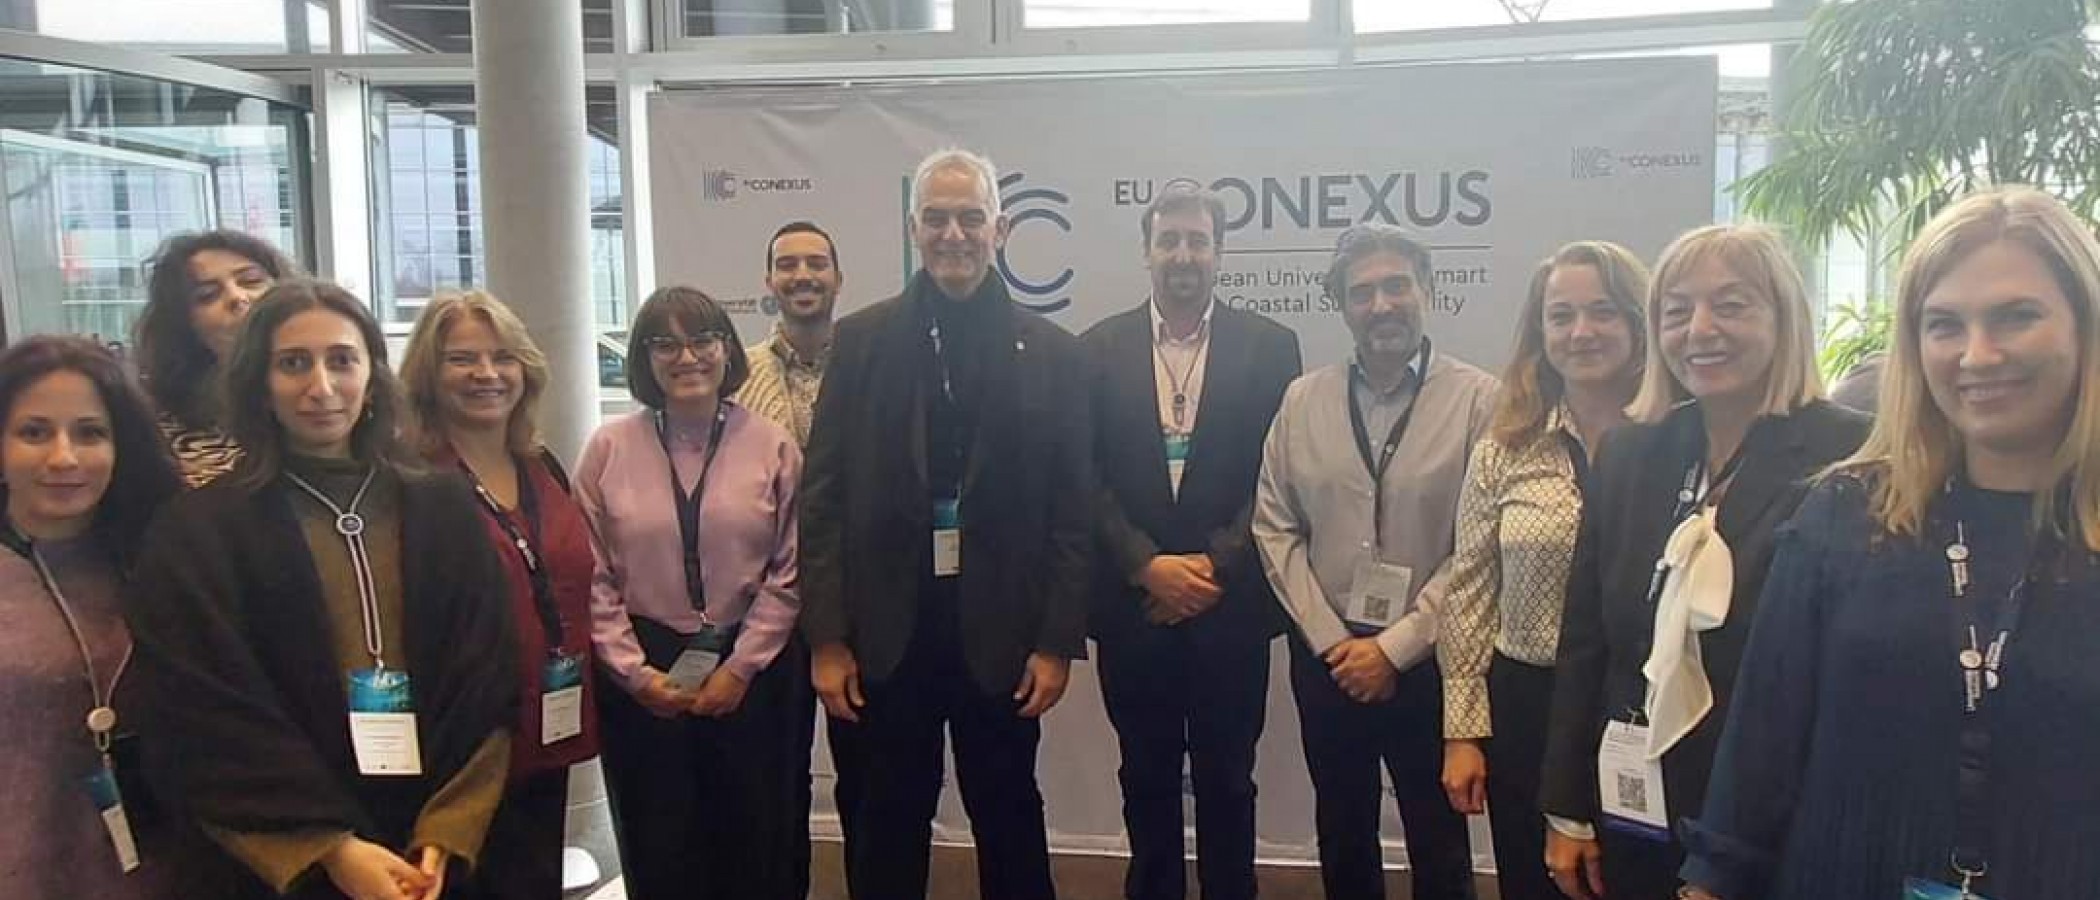 Active participation of the Agricultural University of Athens in the 1st EU-CONEXUS Scientific Conference in Rostock, Germany